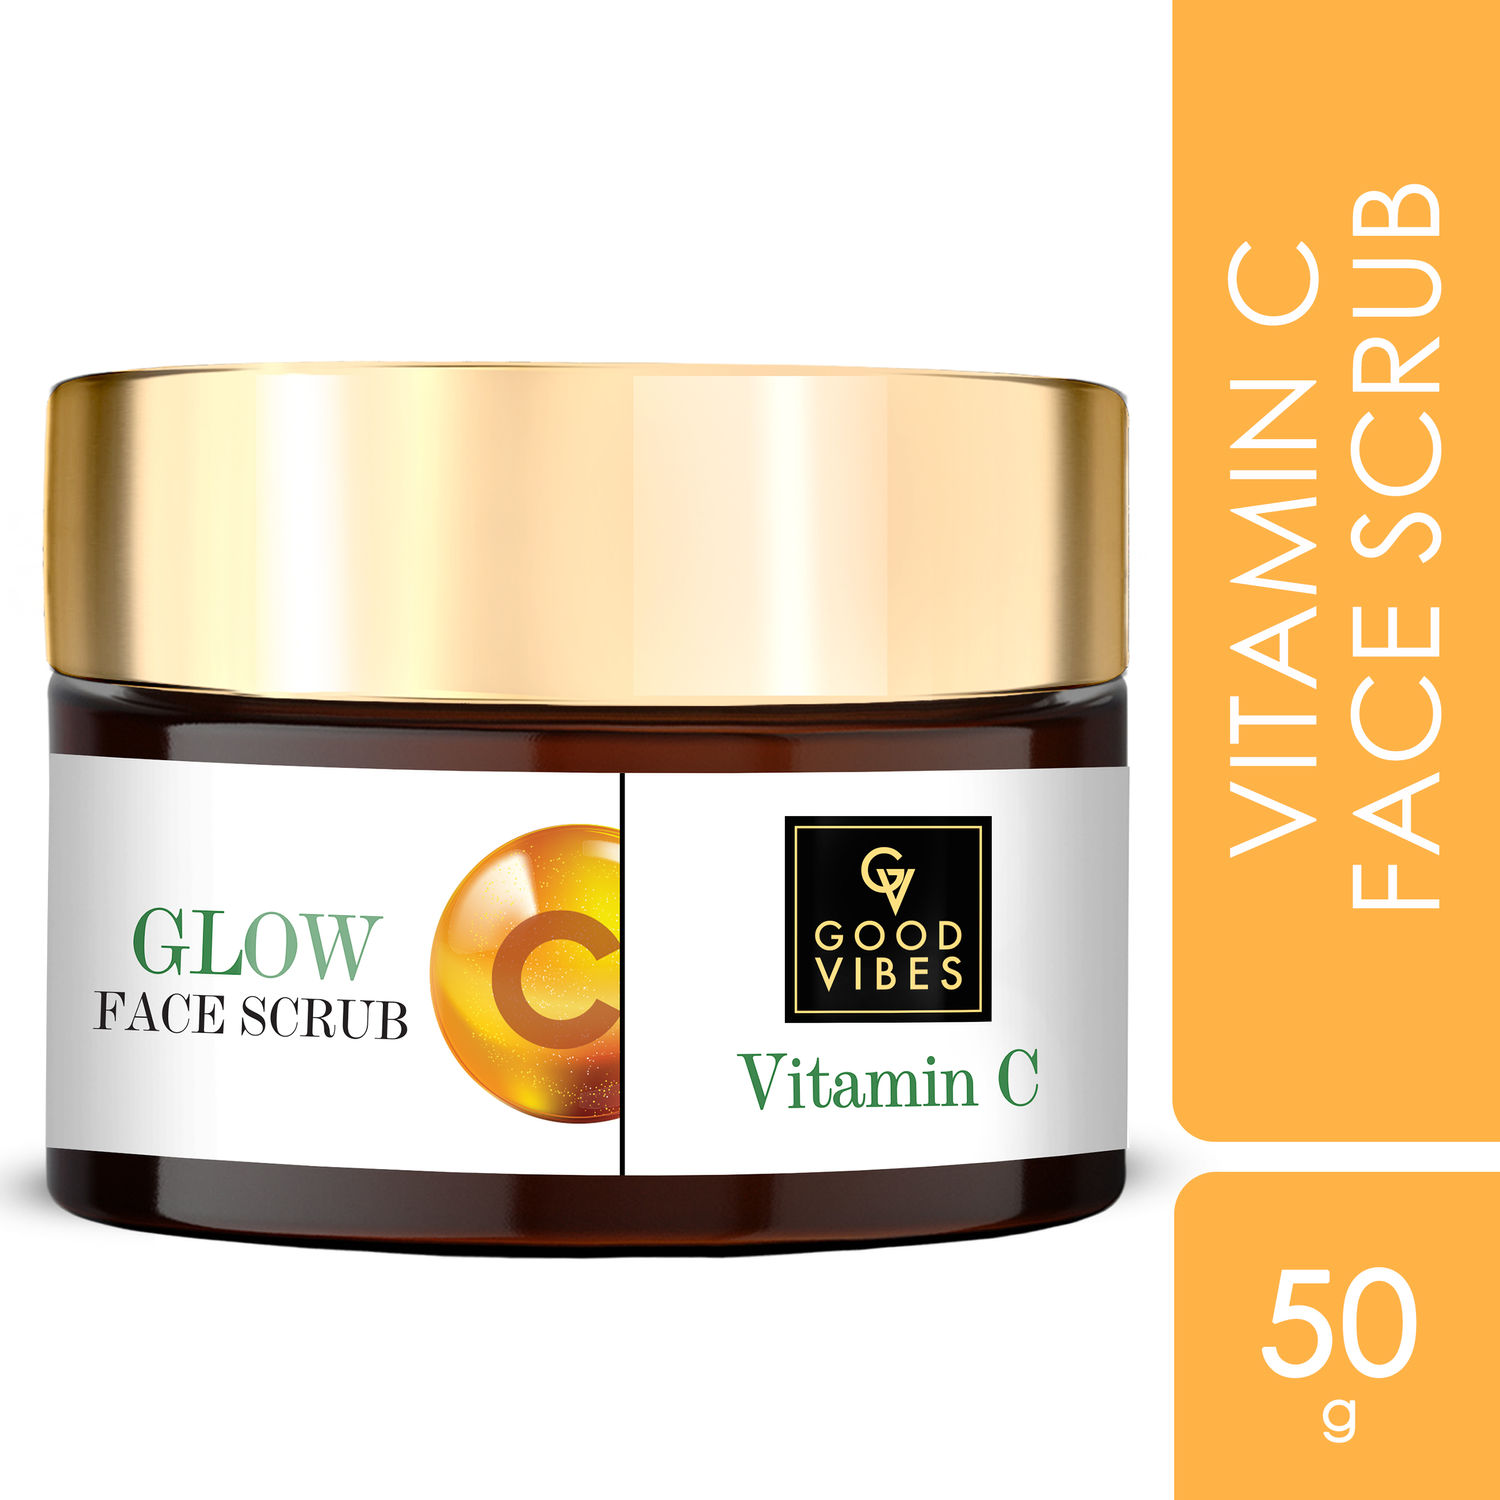 Good Vibes Vitamin C Glow Face Scrub | Clarifying, Hydrating | With Walnut Shell | No Parabens, No Sulphates, No Mineral Oil, No Animal Testing (50 g)